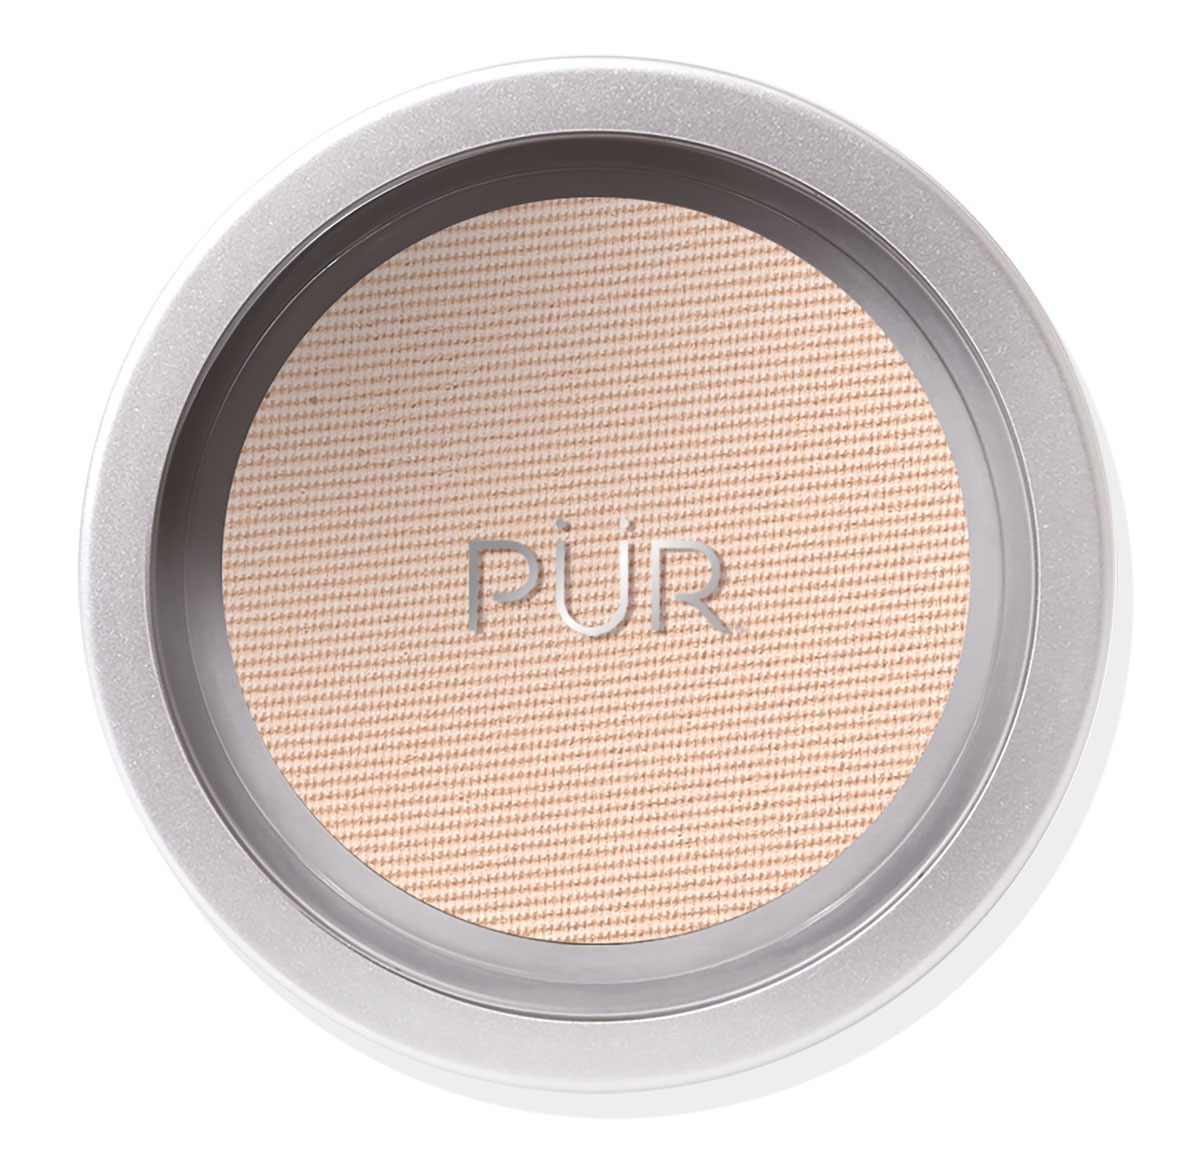 Pur 4-in-1 Pressed Mineral Makeup Foundation